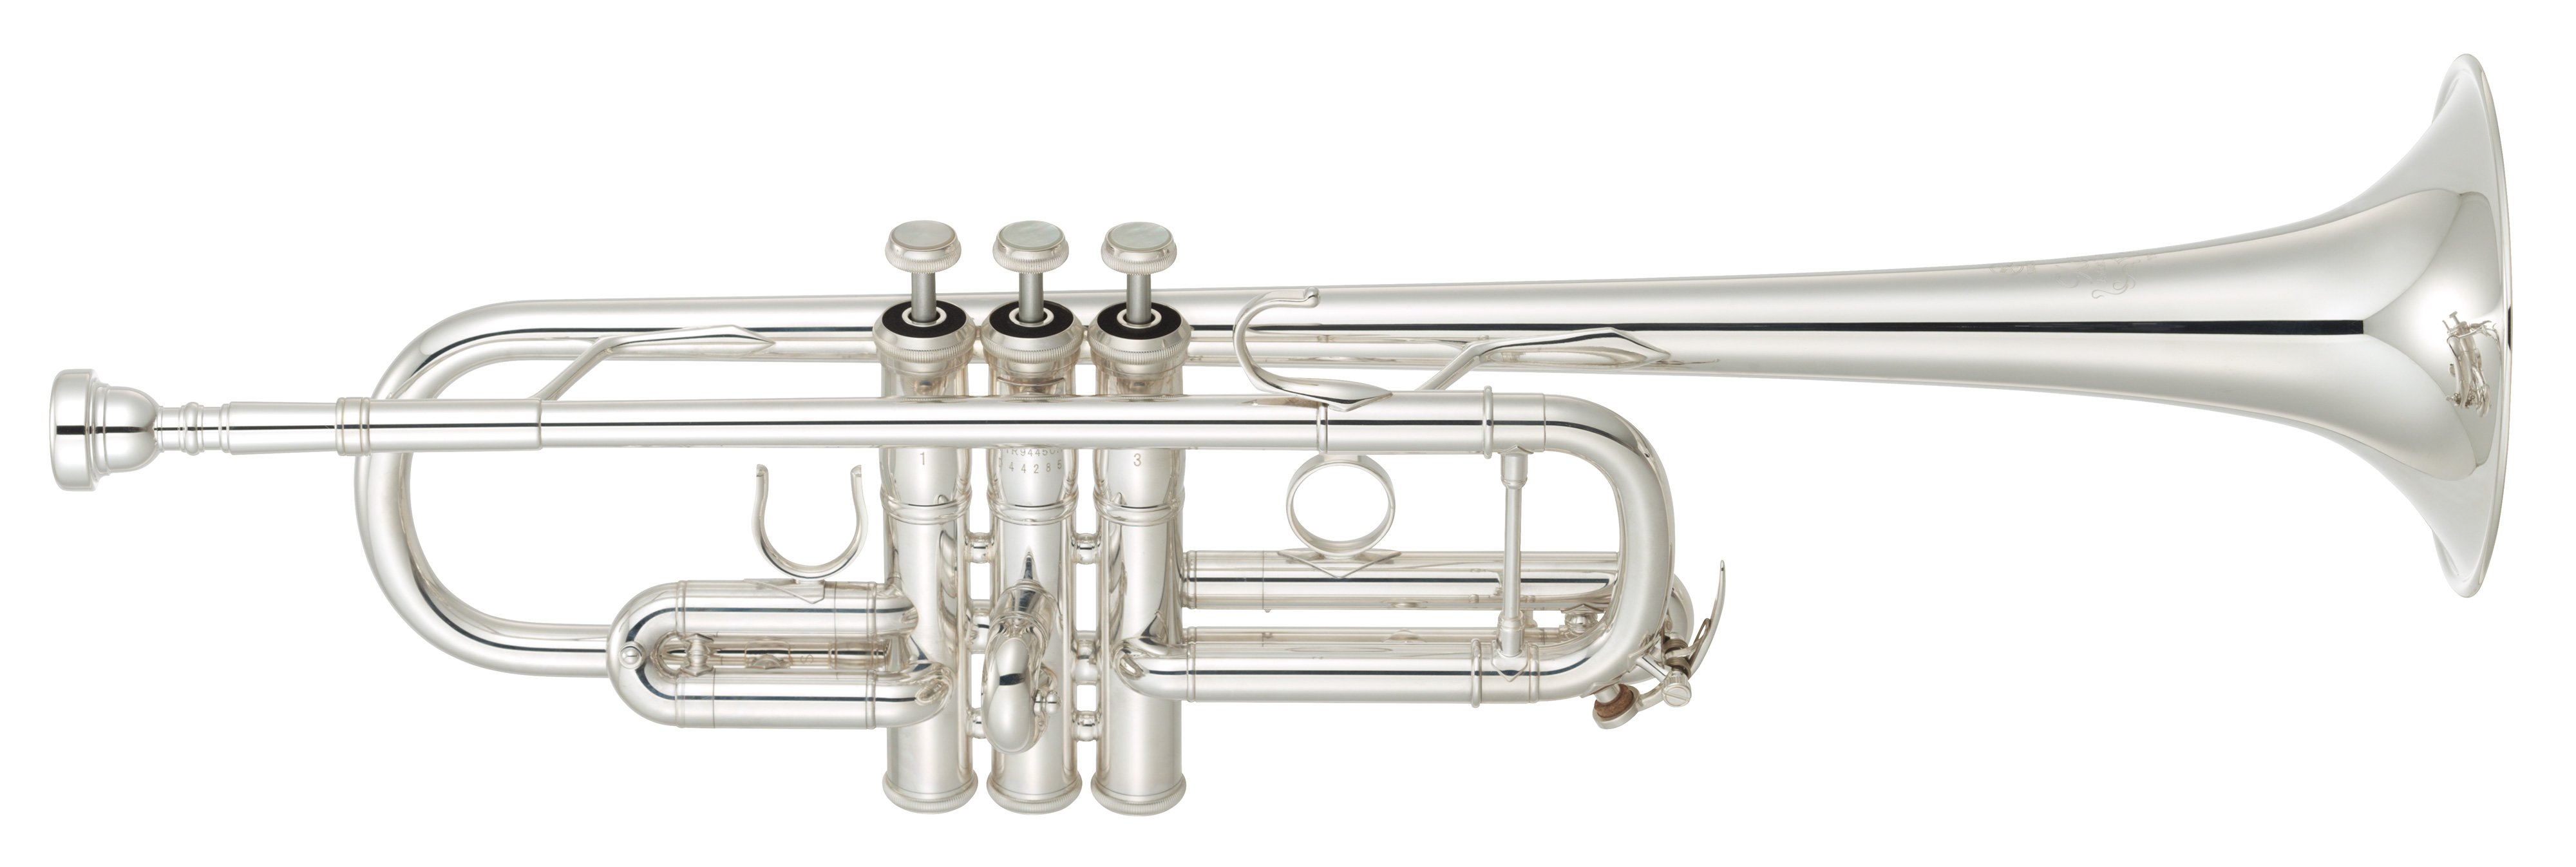 YTR-9445CHS - Features - C Trumpets - Trumpets - Brass & Woodwinds 